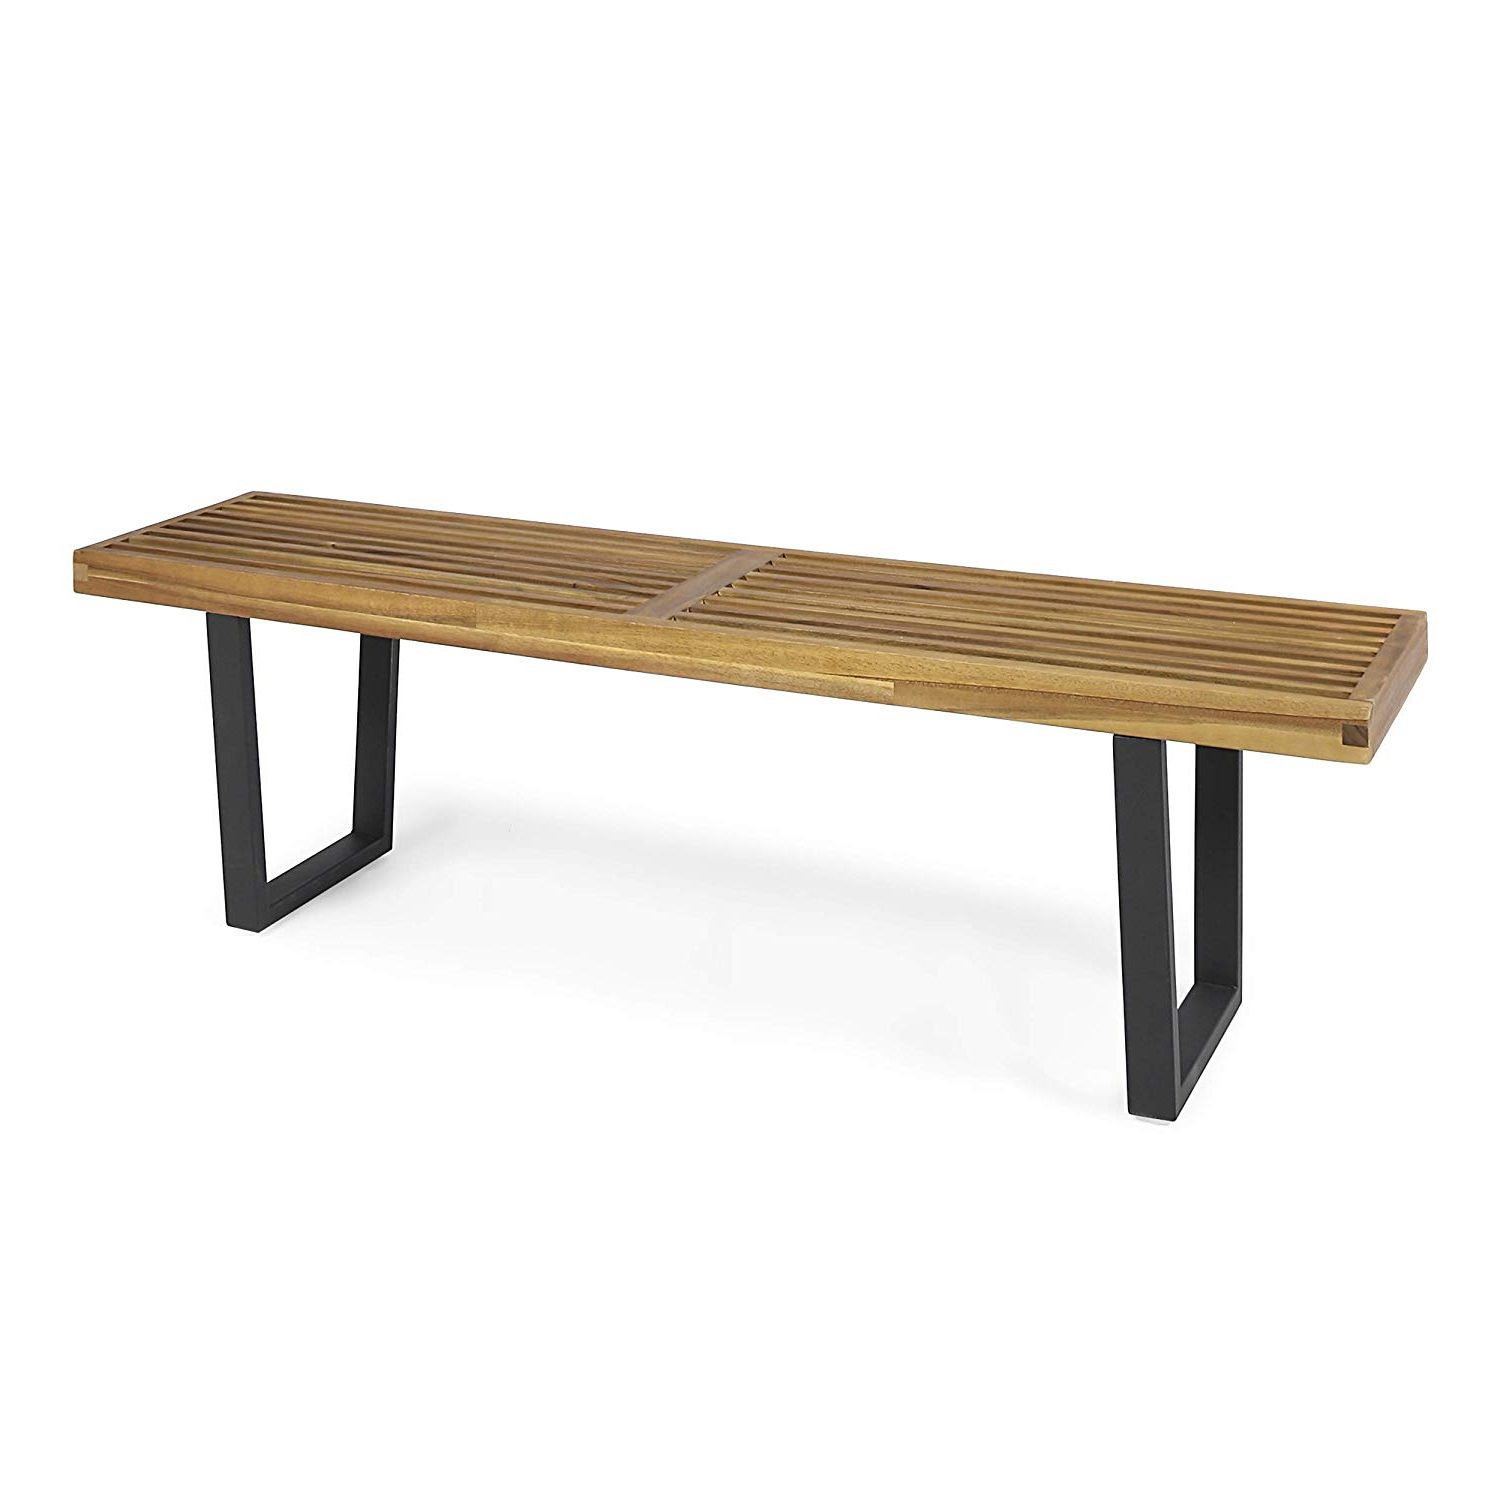 Most Recently Released Acacia Dining Tables With Black X Legs Throughout Christopher Knight Home Joa Patio Dining Bench, Acacia Wood With Iron Legs,  Modern, Contemporary, Teak Finish, Black (Photo 20 of 25)